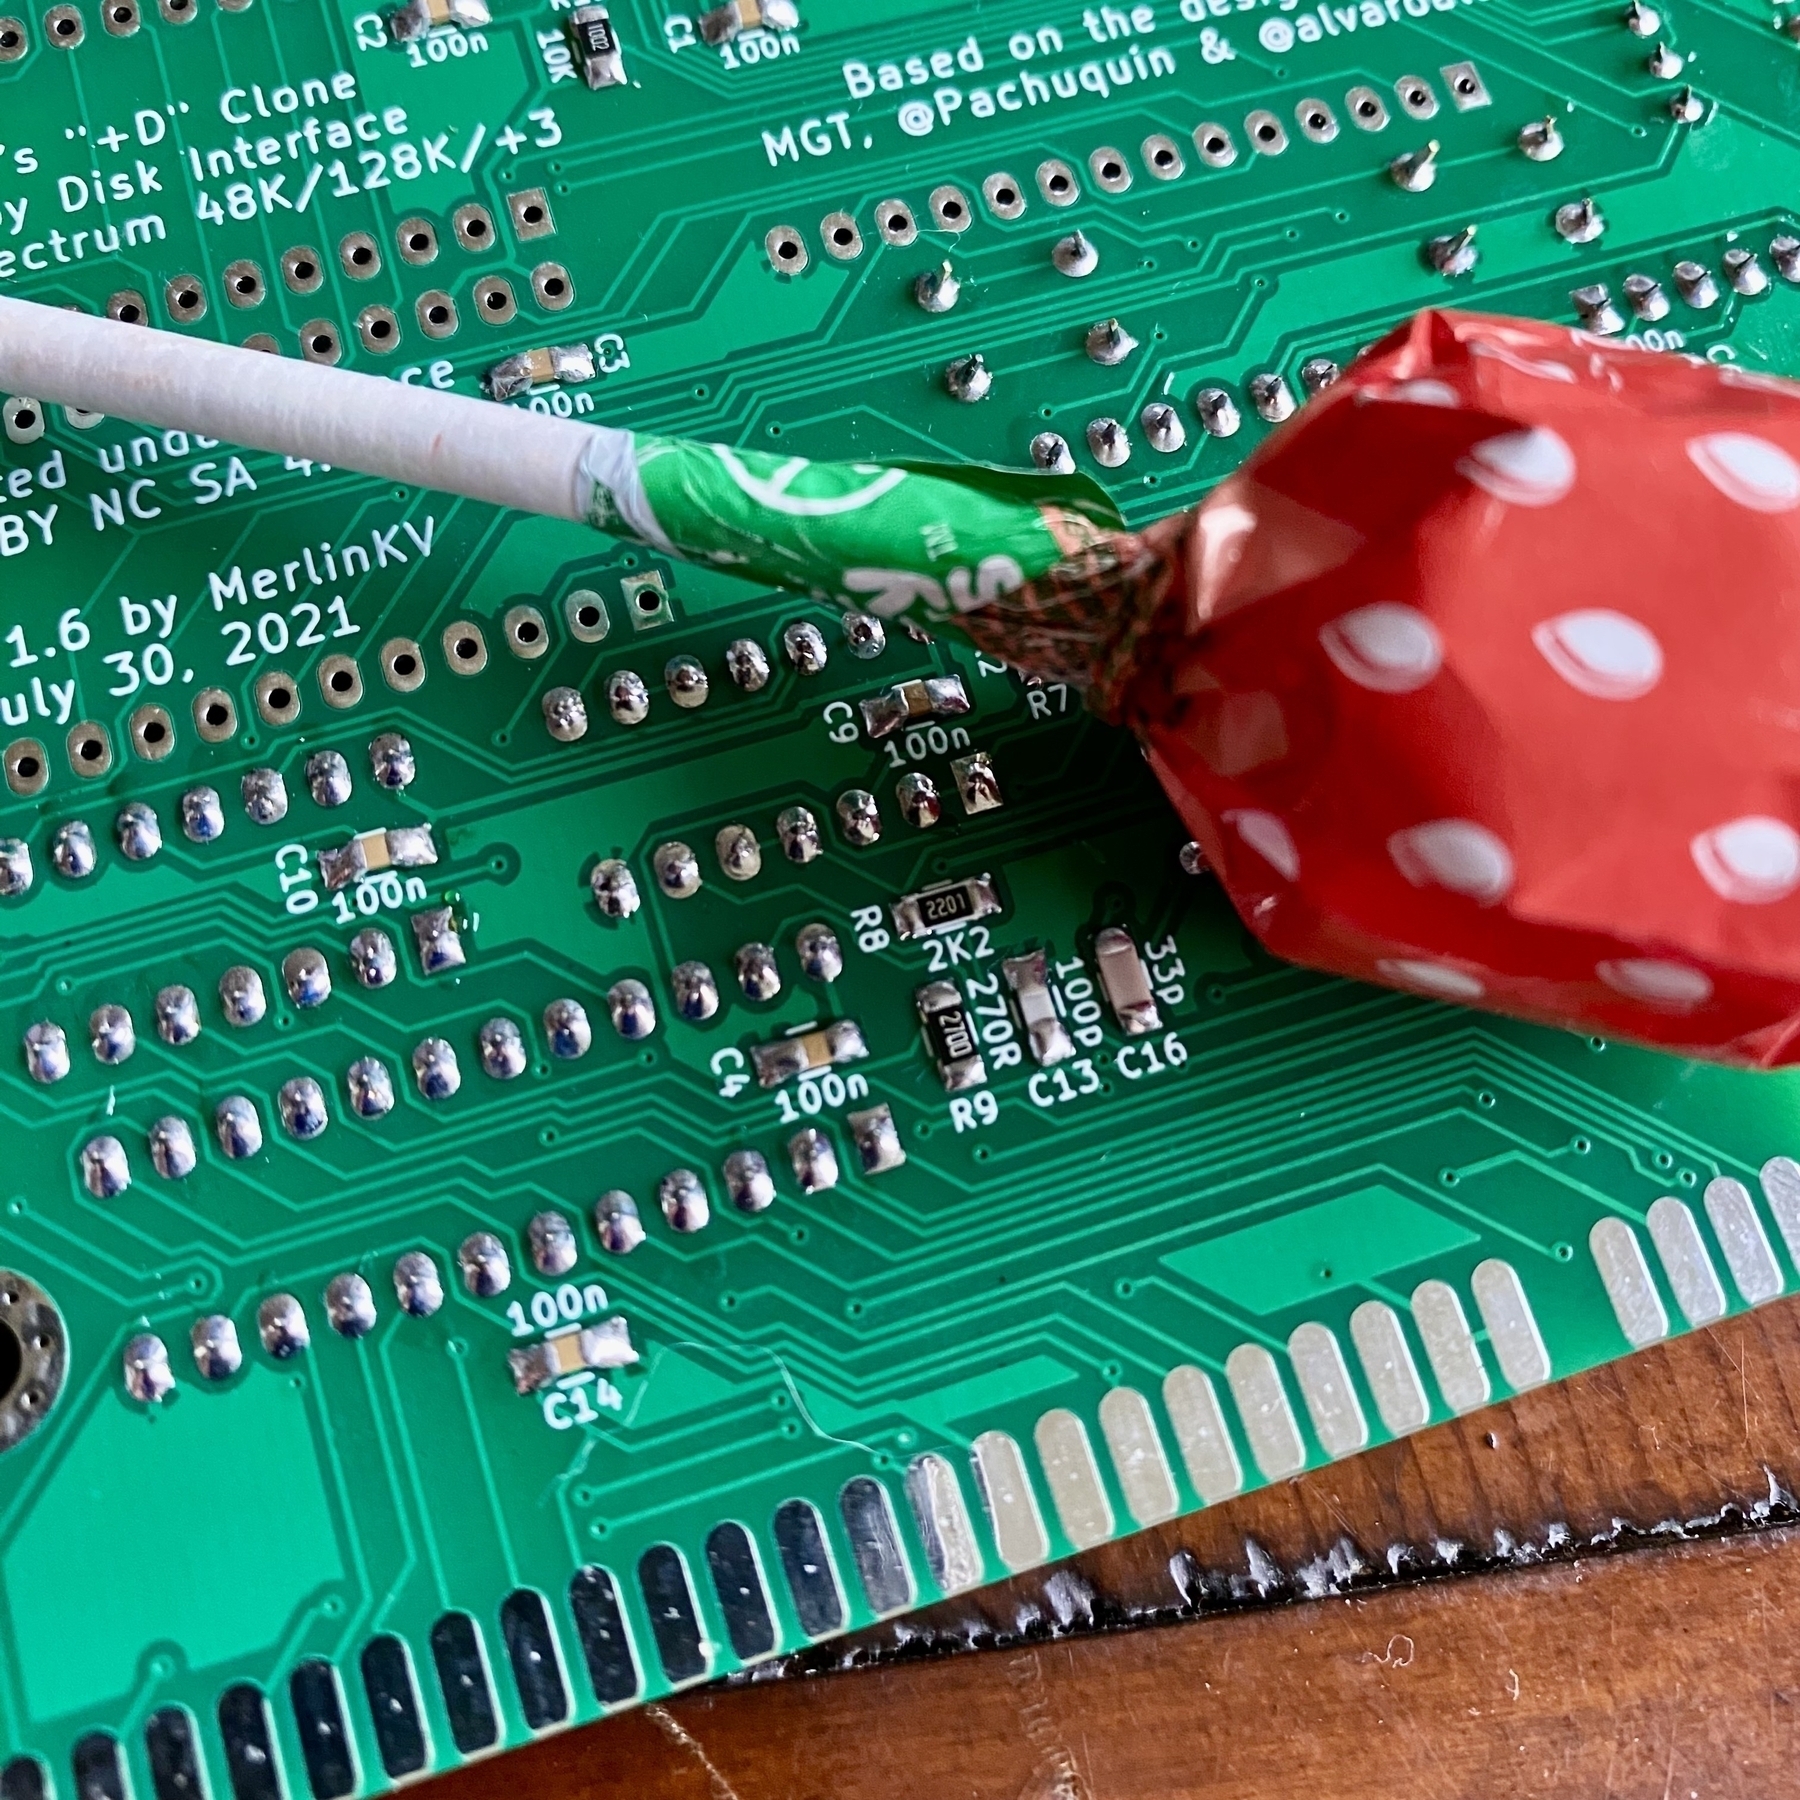 Detail of a partially assembled circuit board. Small SMT components on millimetres in size have been soldered to the board. A strawberry Chuppa Chupp lolly has been put into the photograph to give a sense of scale.